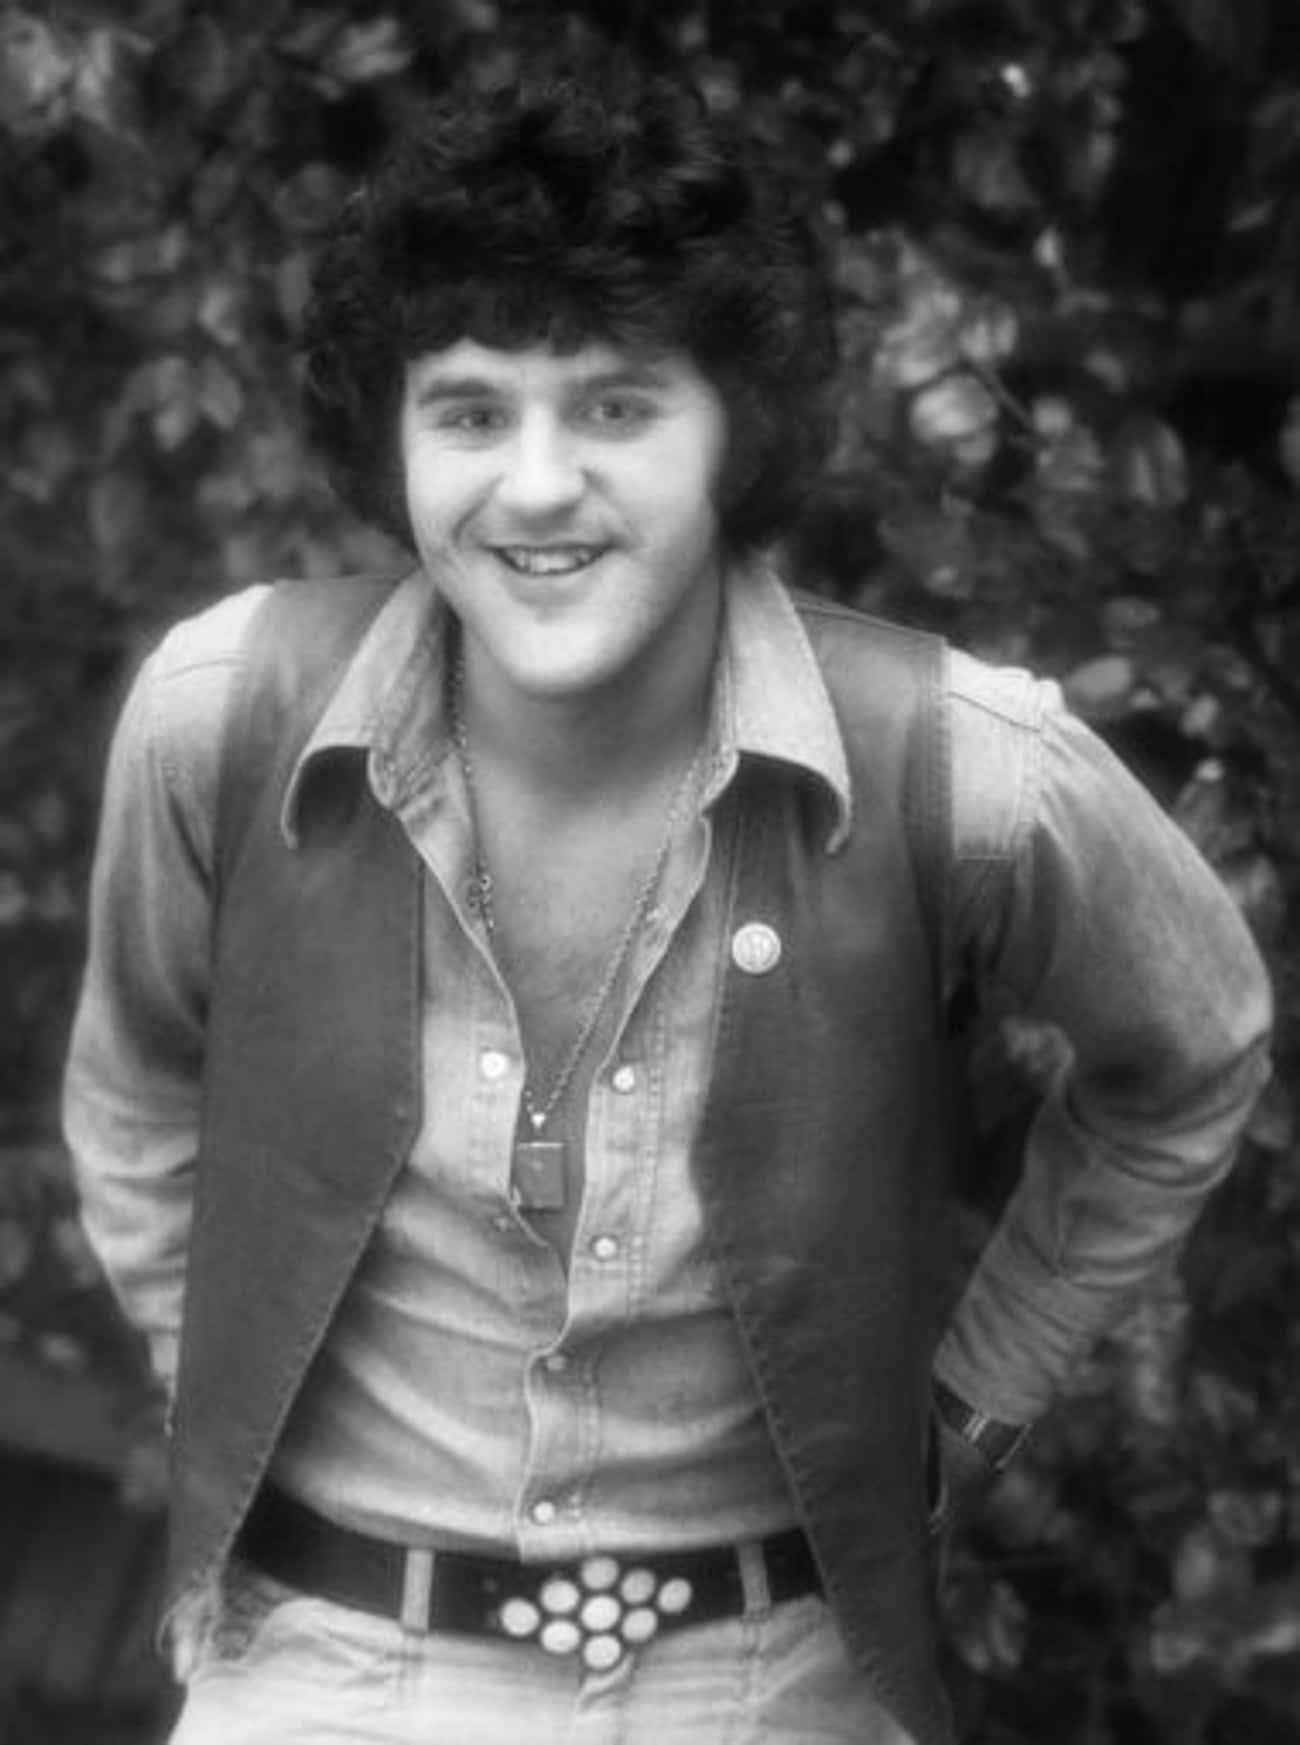 Young Jay Leno in Buttondown Shirt and Vest